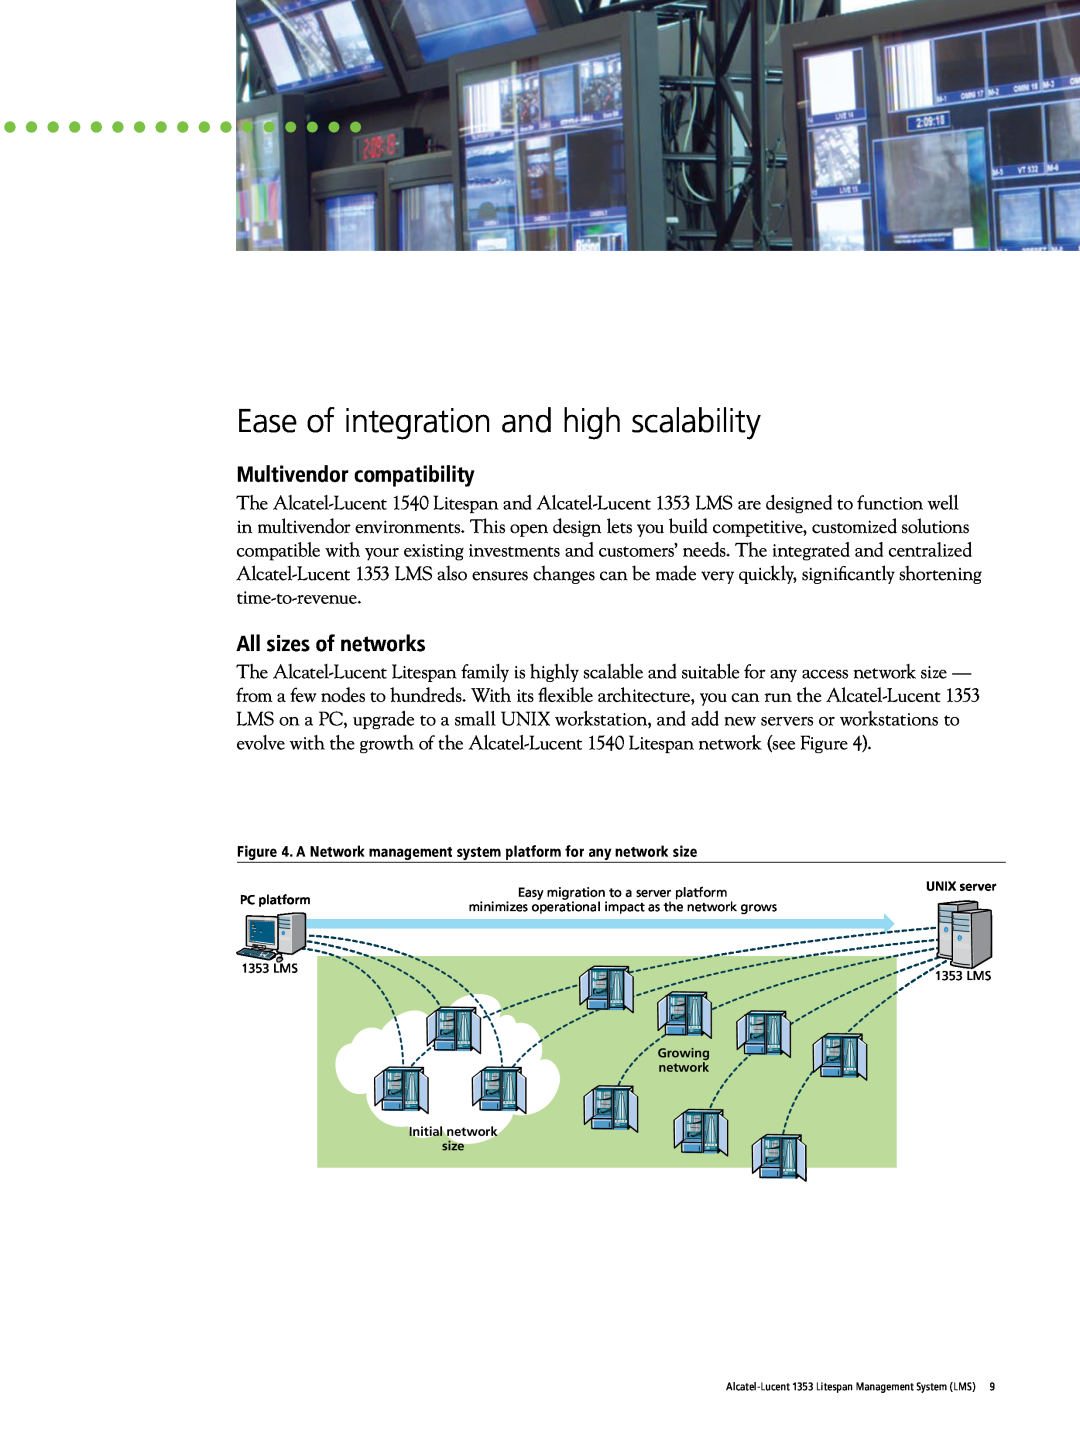 Alcatel-Lucent 1353 manual Ease of integration and high scalability, Multivendor compatibility, All sizes of networks 